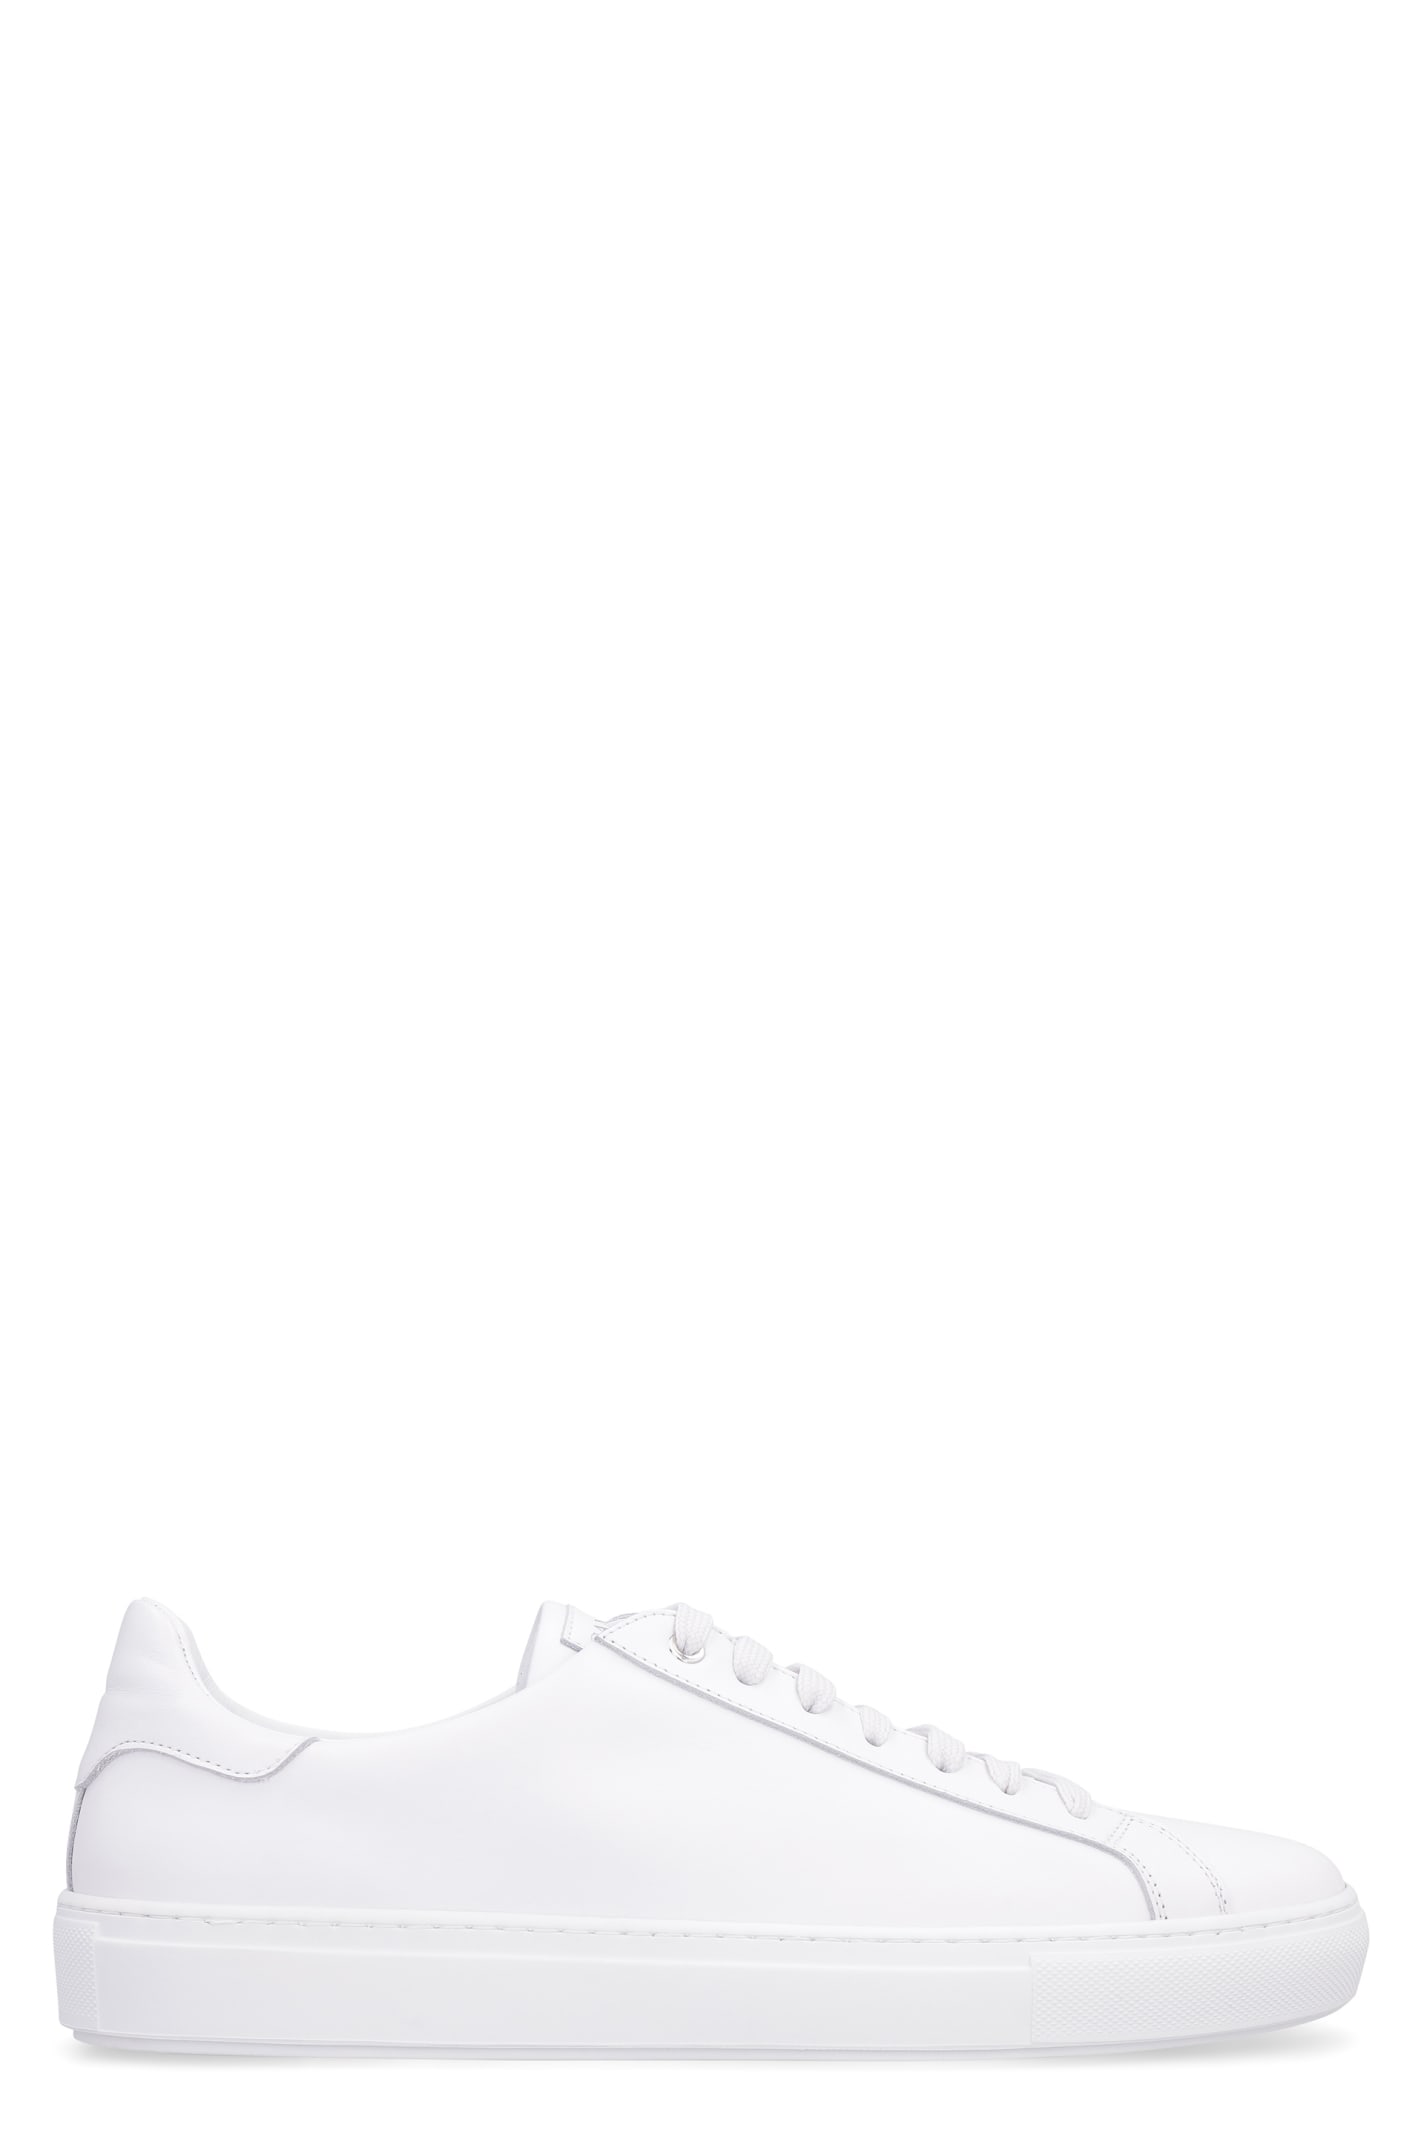 Canali Leather Low-top Sneakers